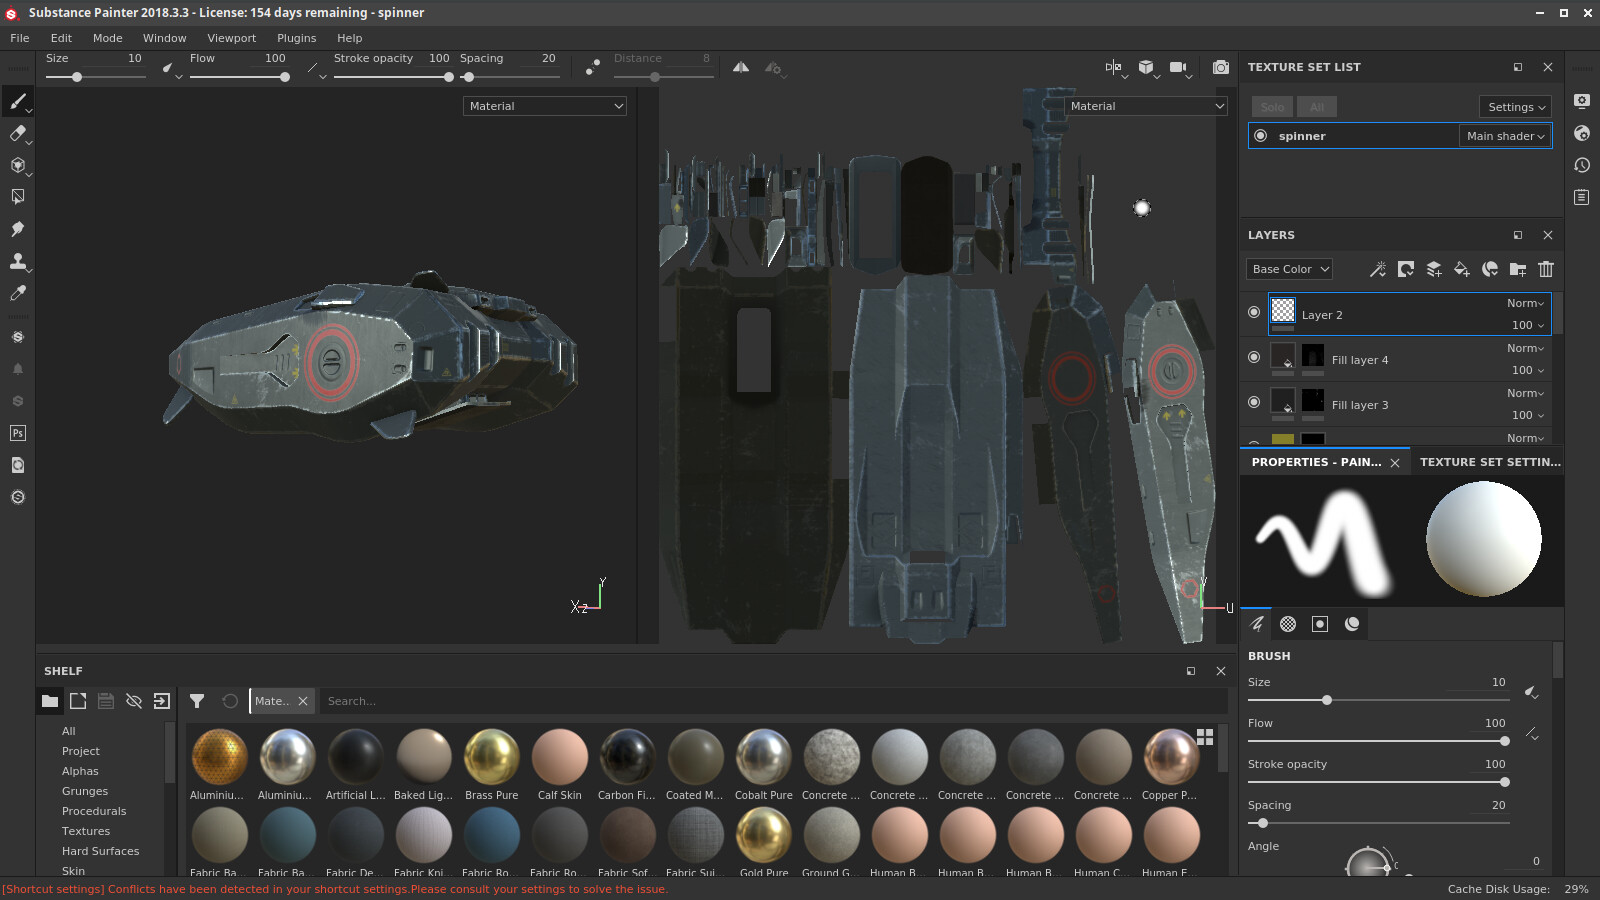 all Skimmer textures done in substance painter